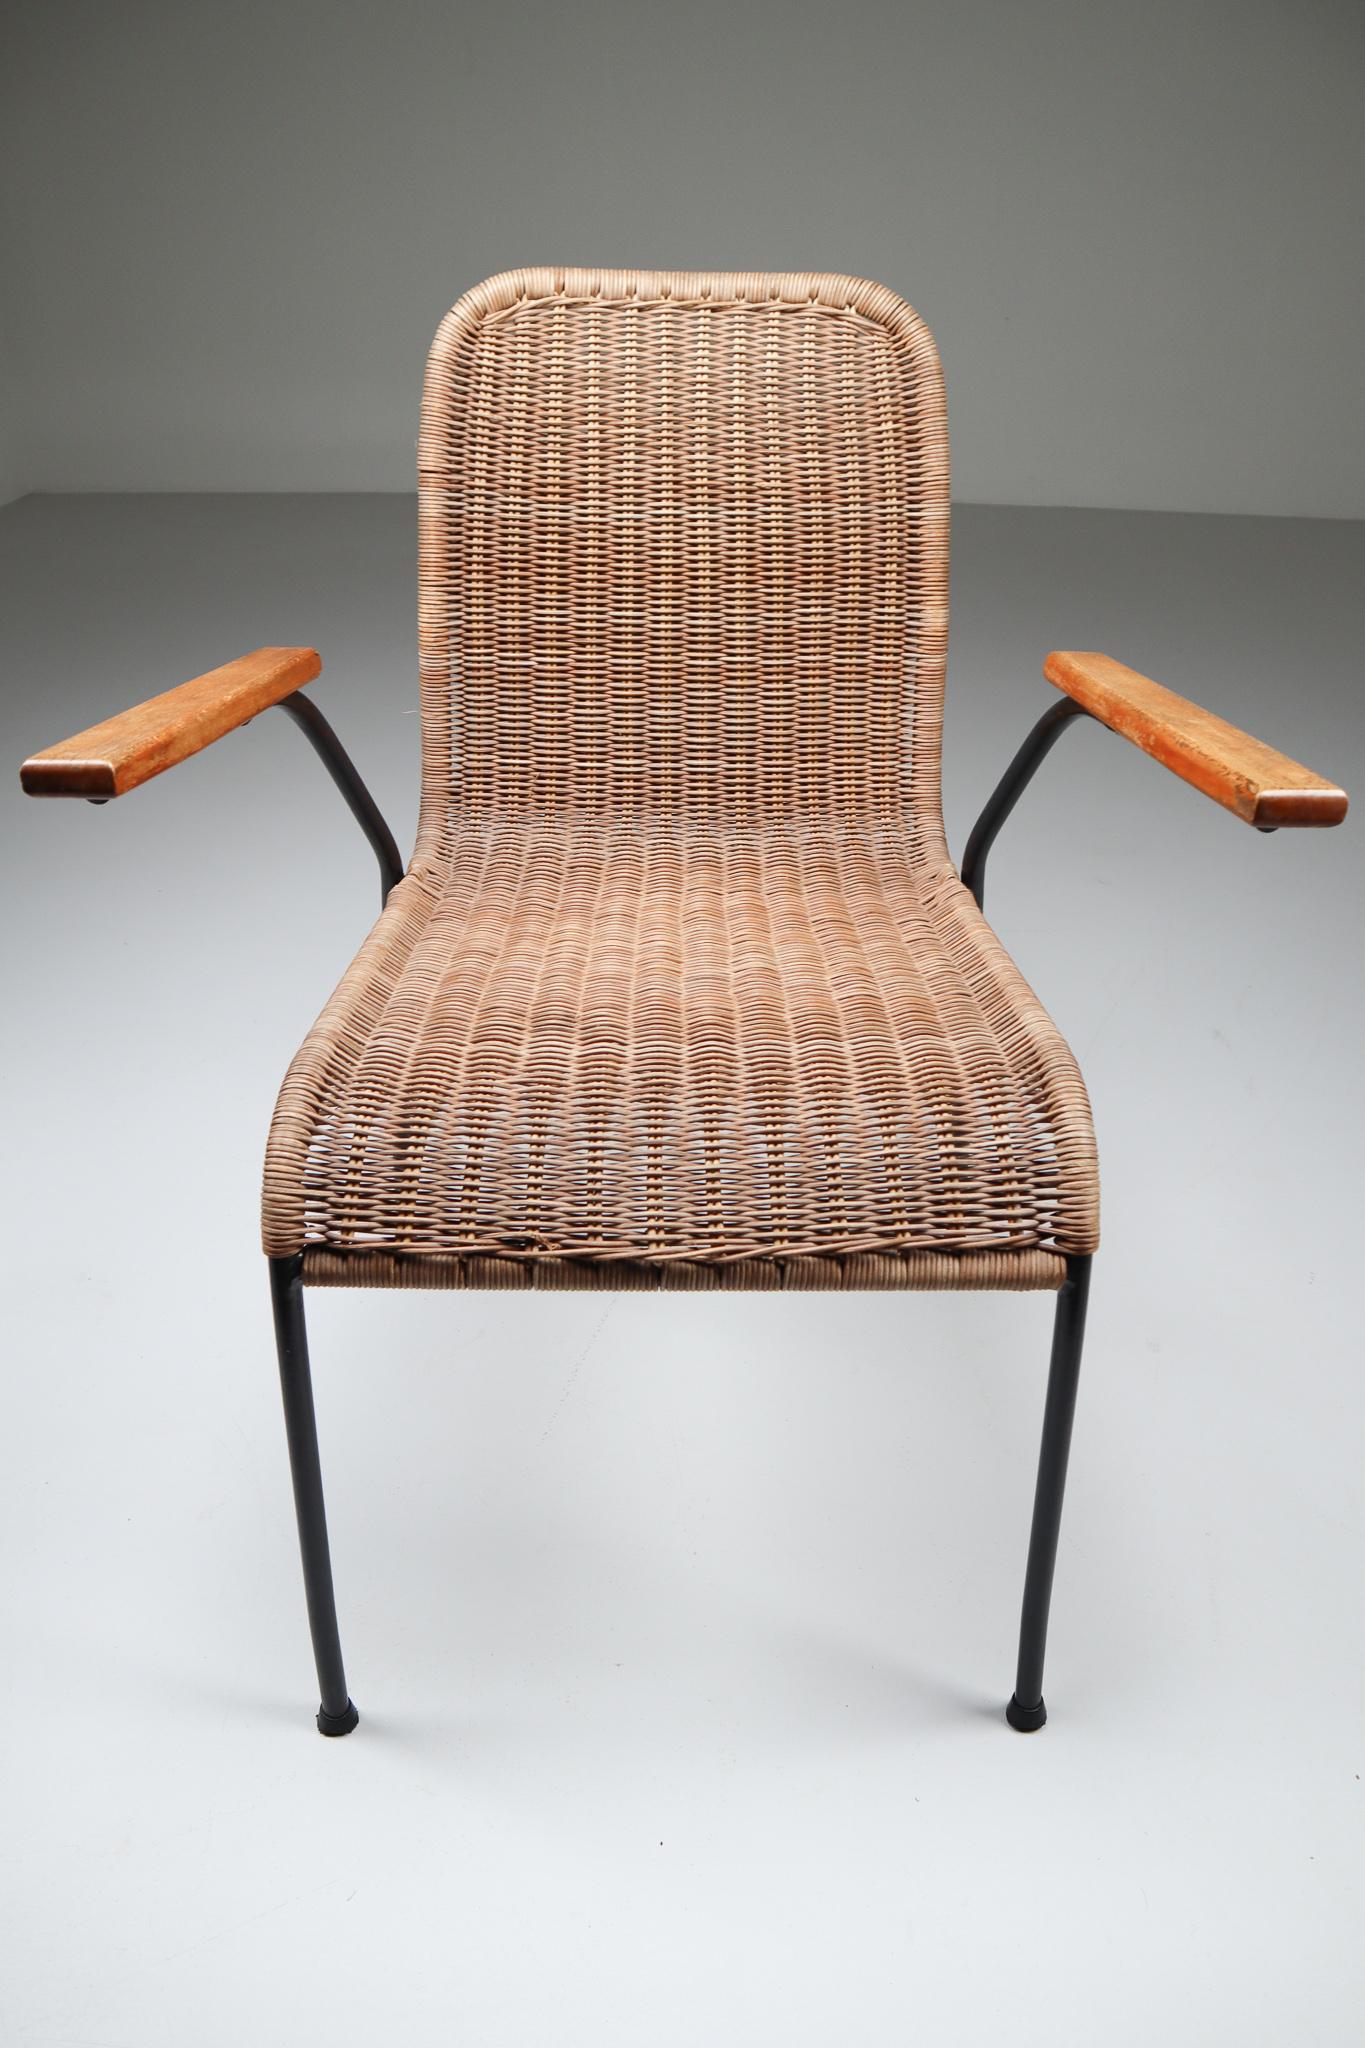 Mid-Century Modern Patinated Metal Framed Armchairs with Woven Wicker Seat, The Netherlands, 1950